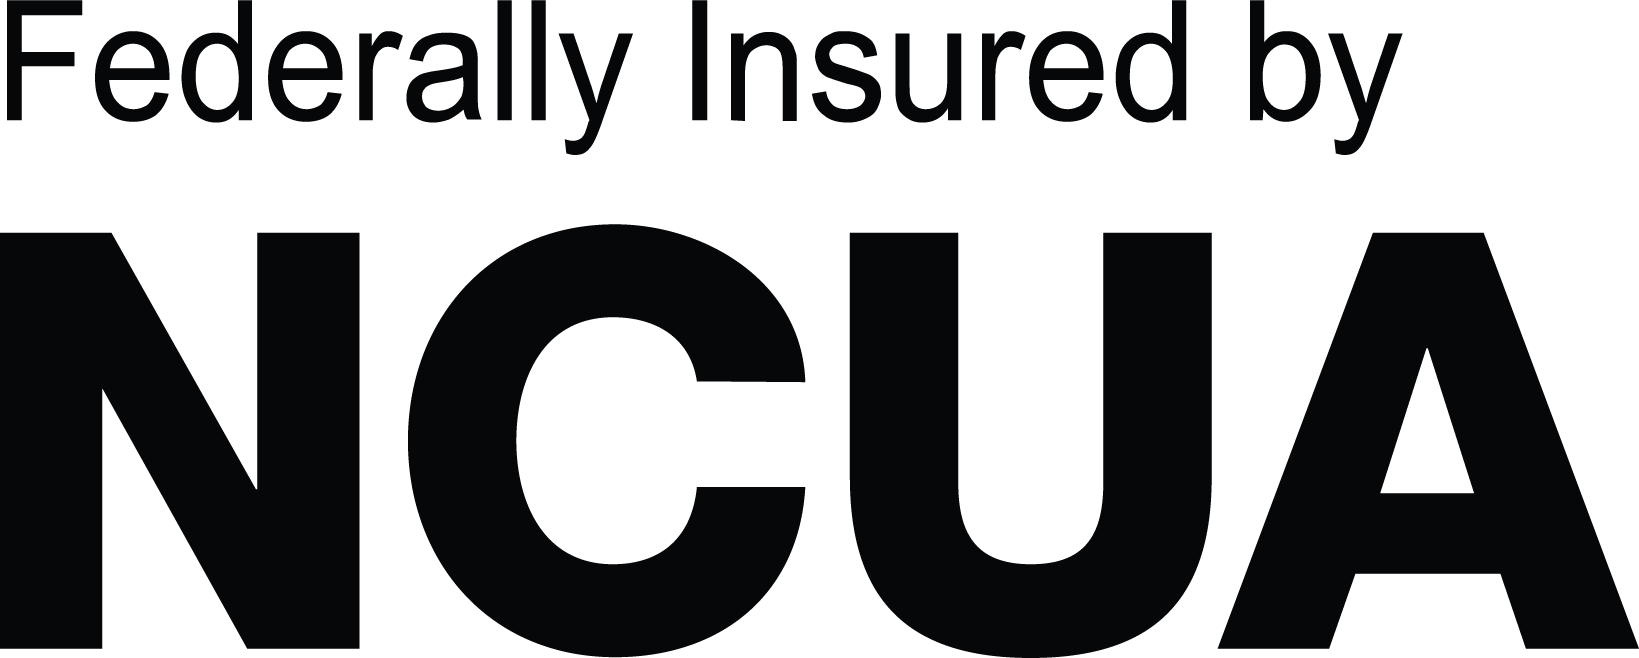 Federally insured by NCUA